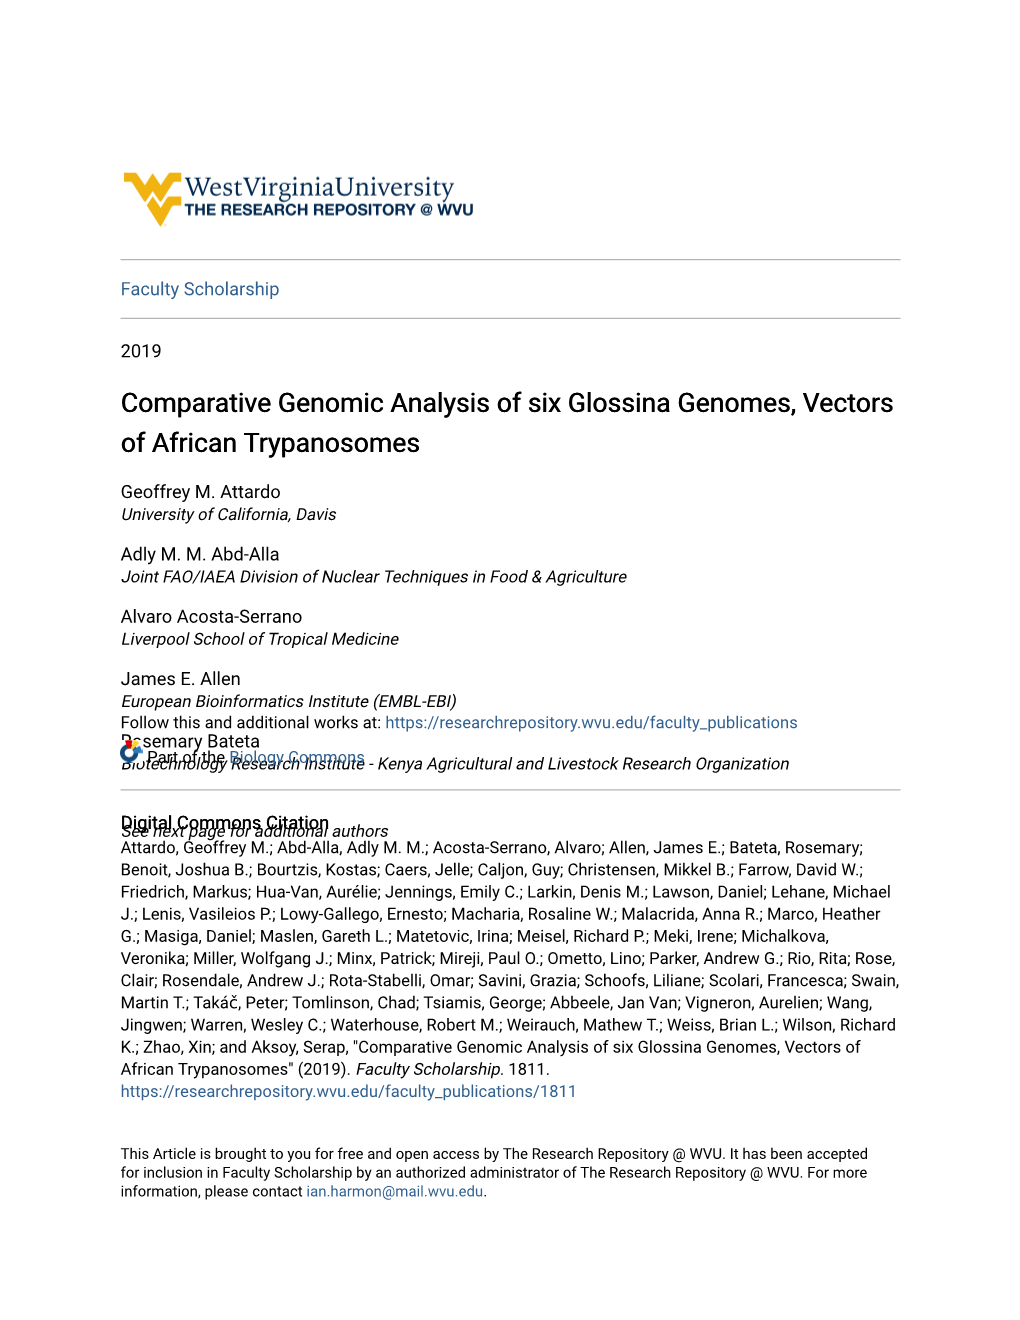 Comparative Genomic Analysis of Six Glossina Genomes, Vectors of African Trypanosomes